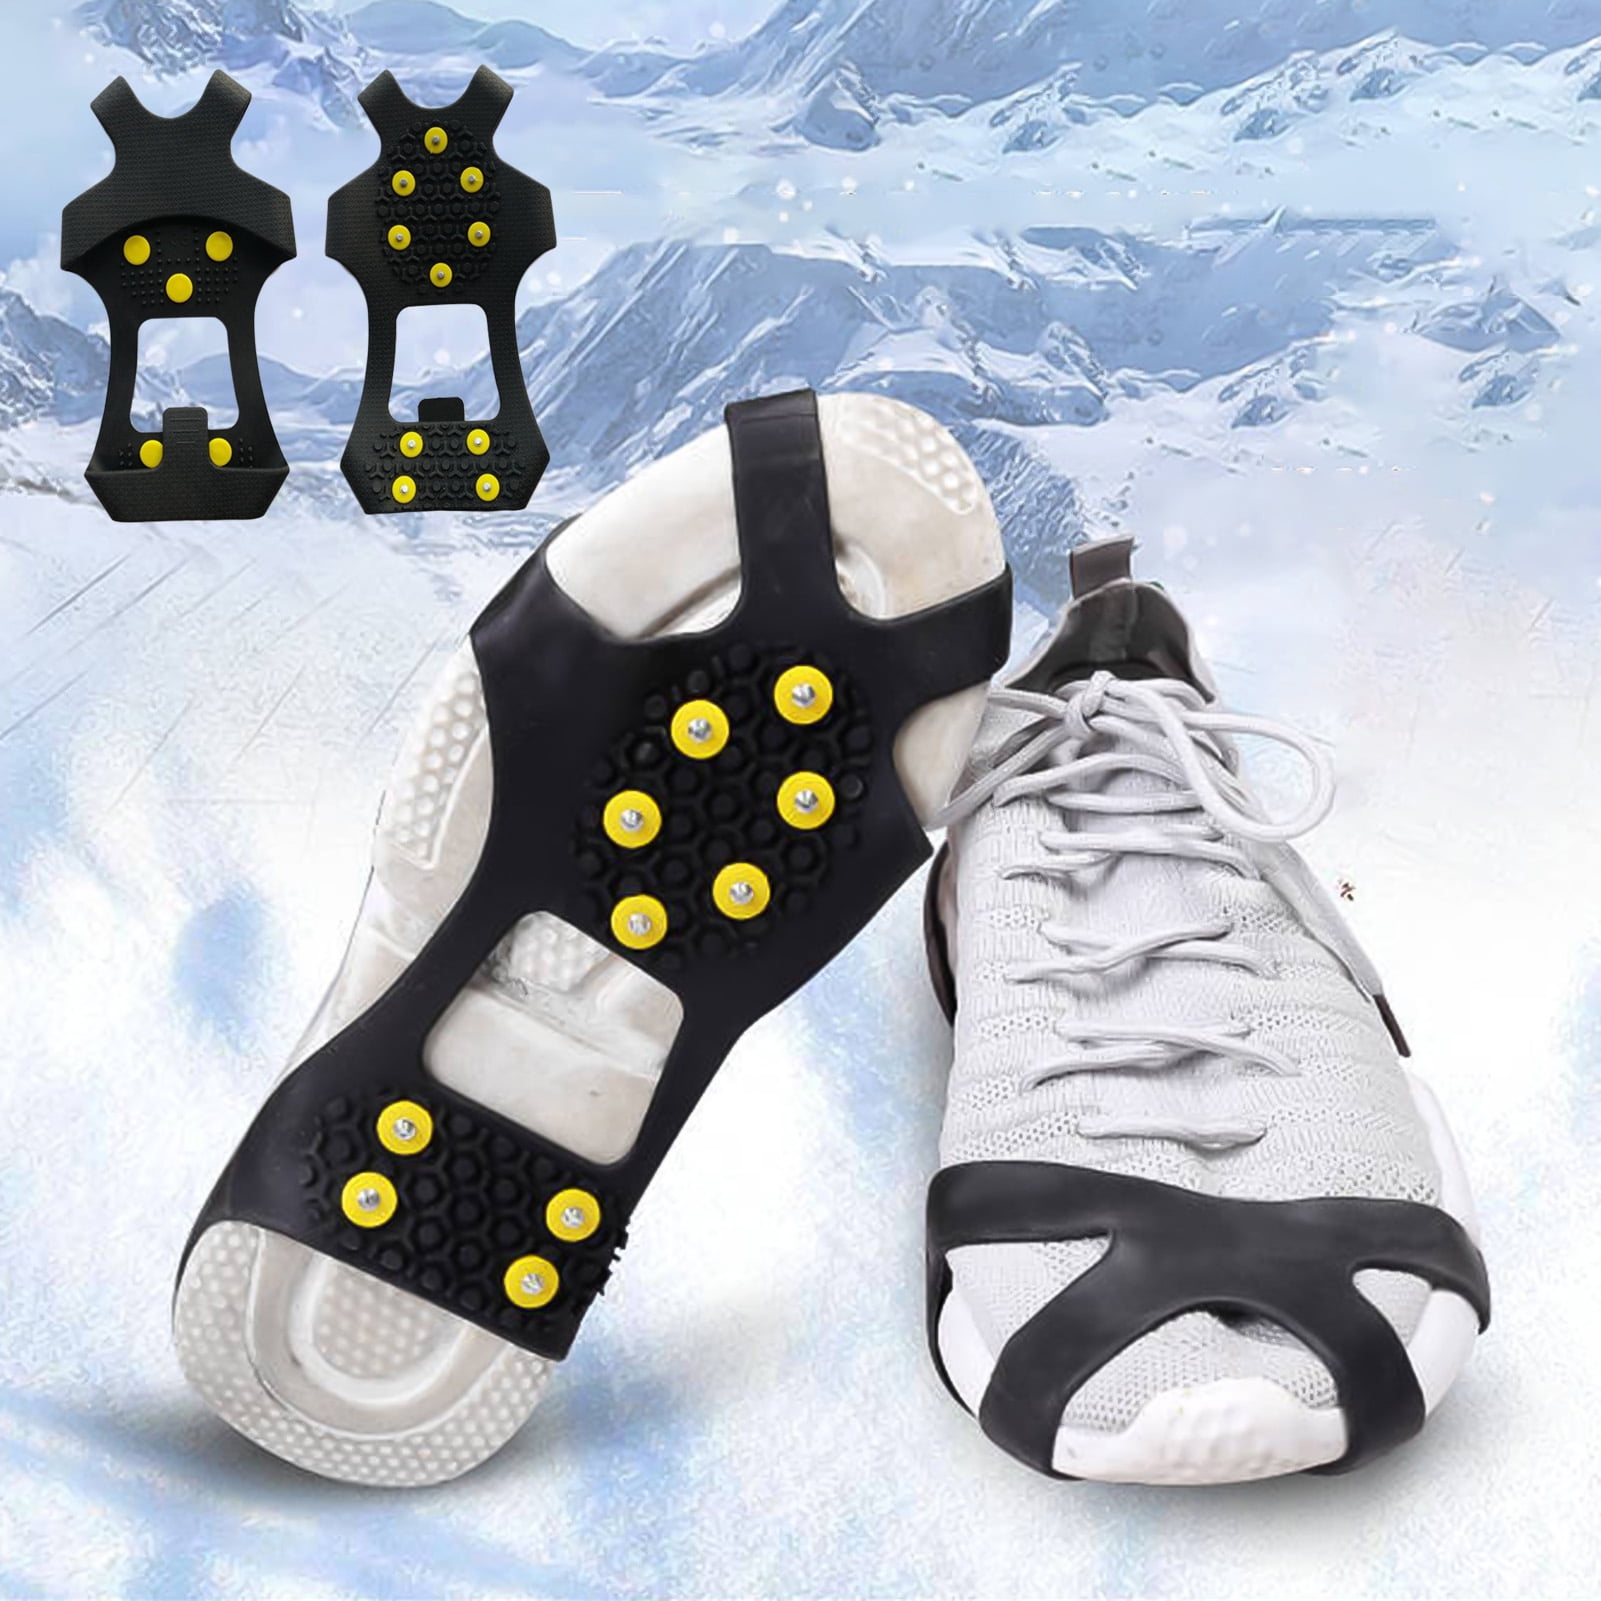 LHIABNN Silicone Non-Slip Shoe Cover Ice Snow Grips,Spikes Anti Slip Mountaineering Slip-on Stretch Footwear,Traction Cleats for Walking Jogging Hiking on Snow and Ice